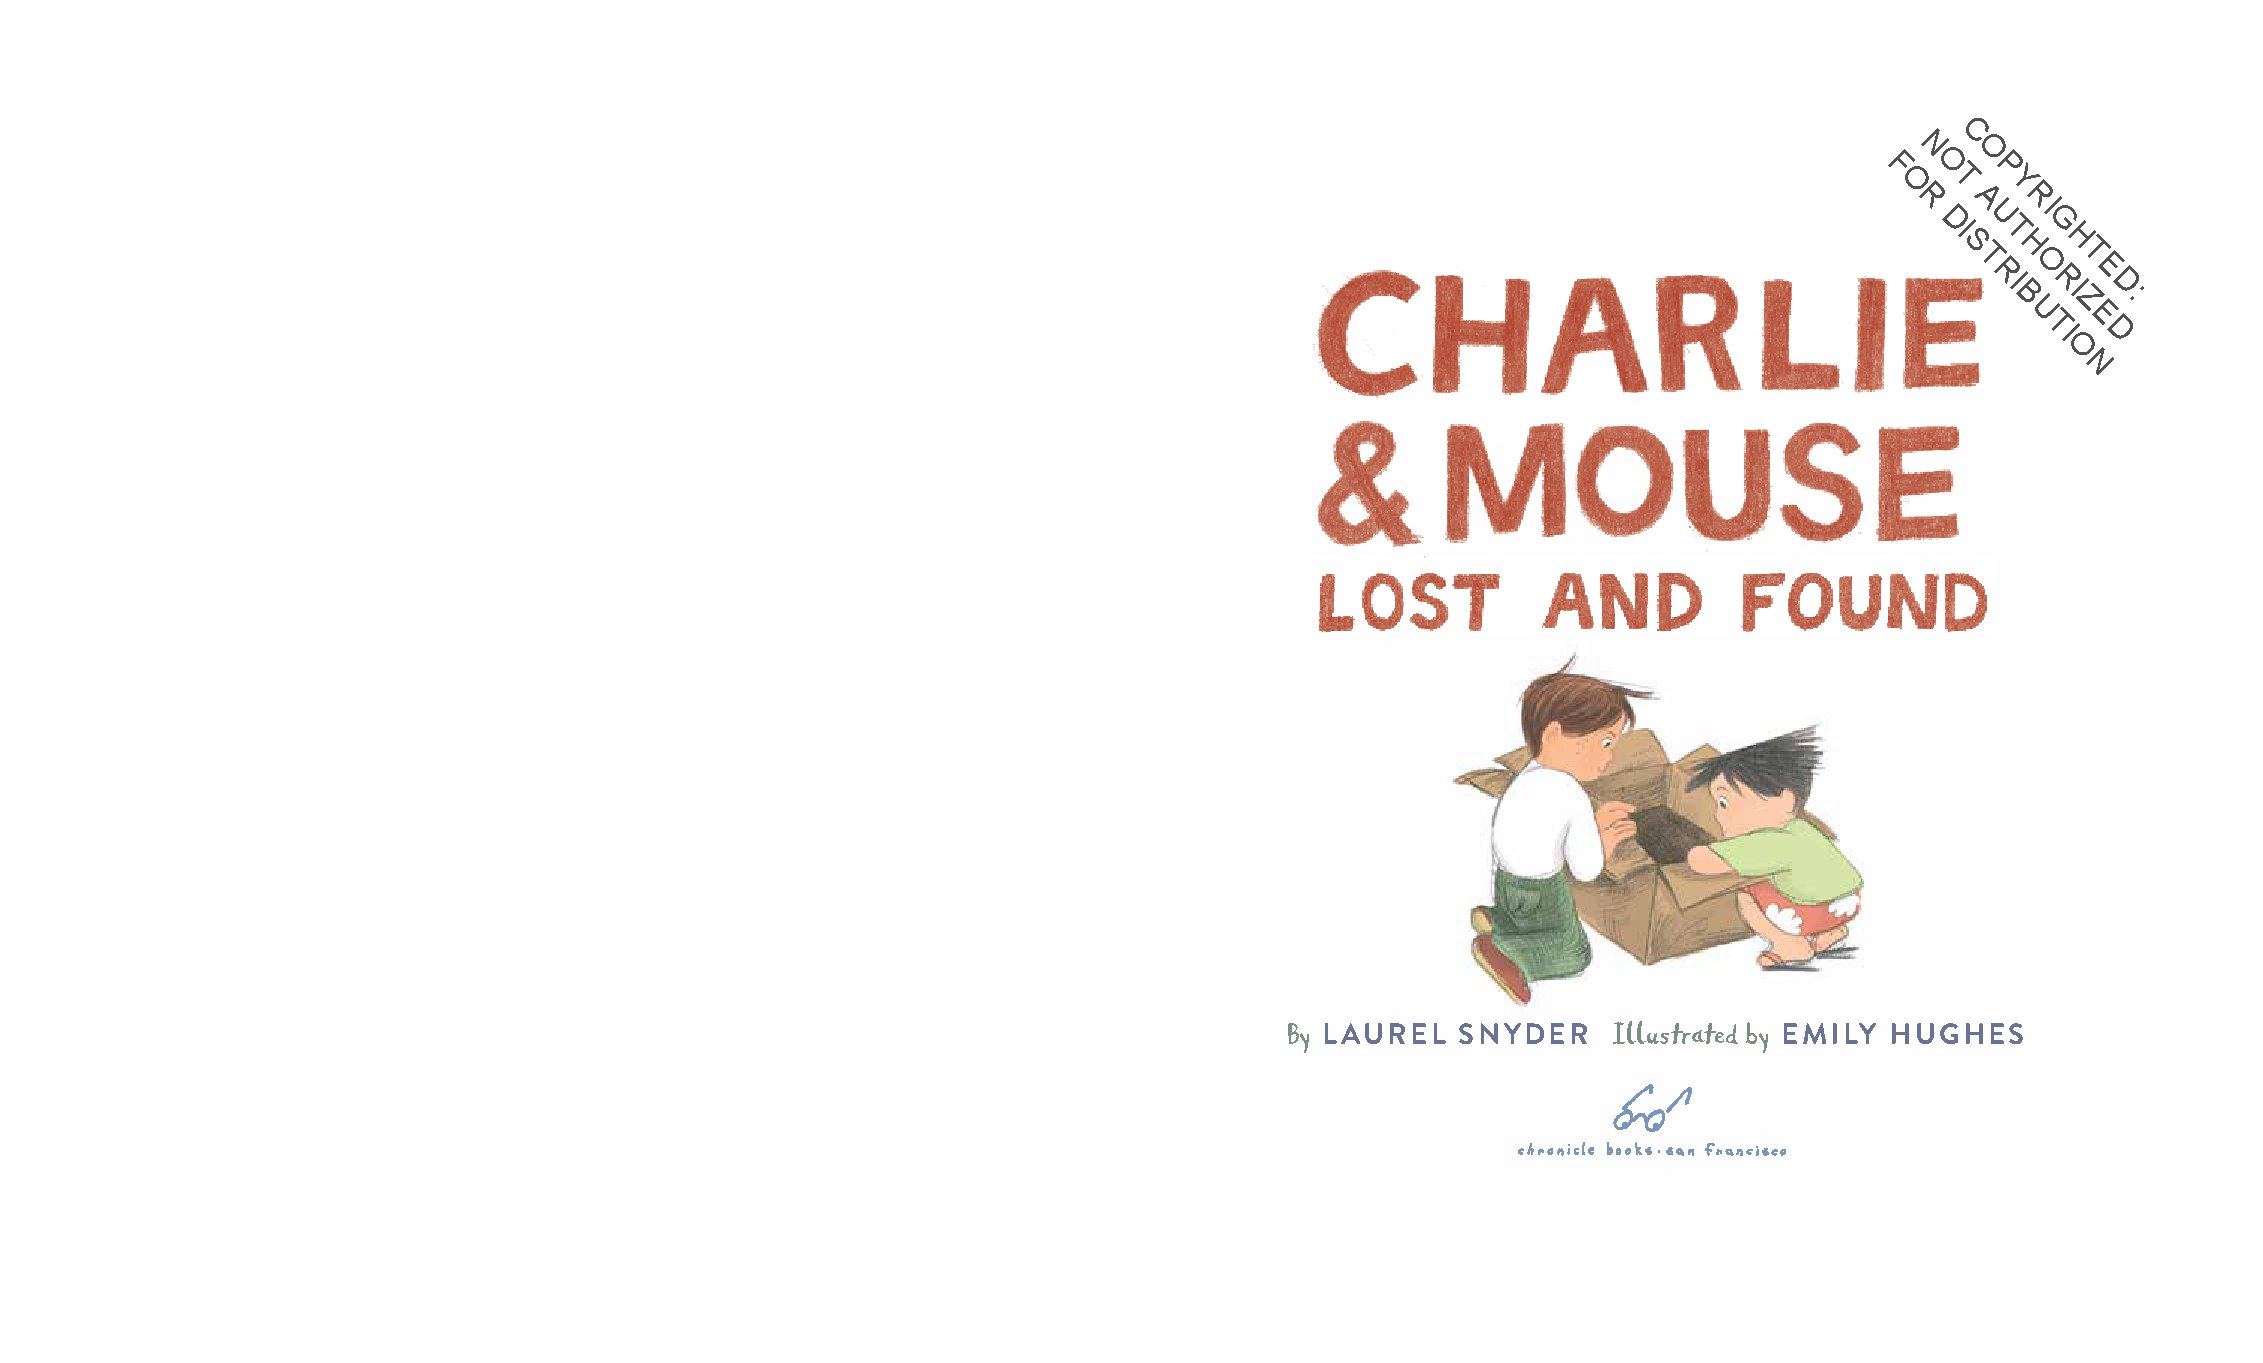 Charlie & Mouse Lost and Found